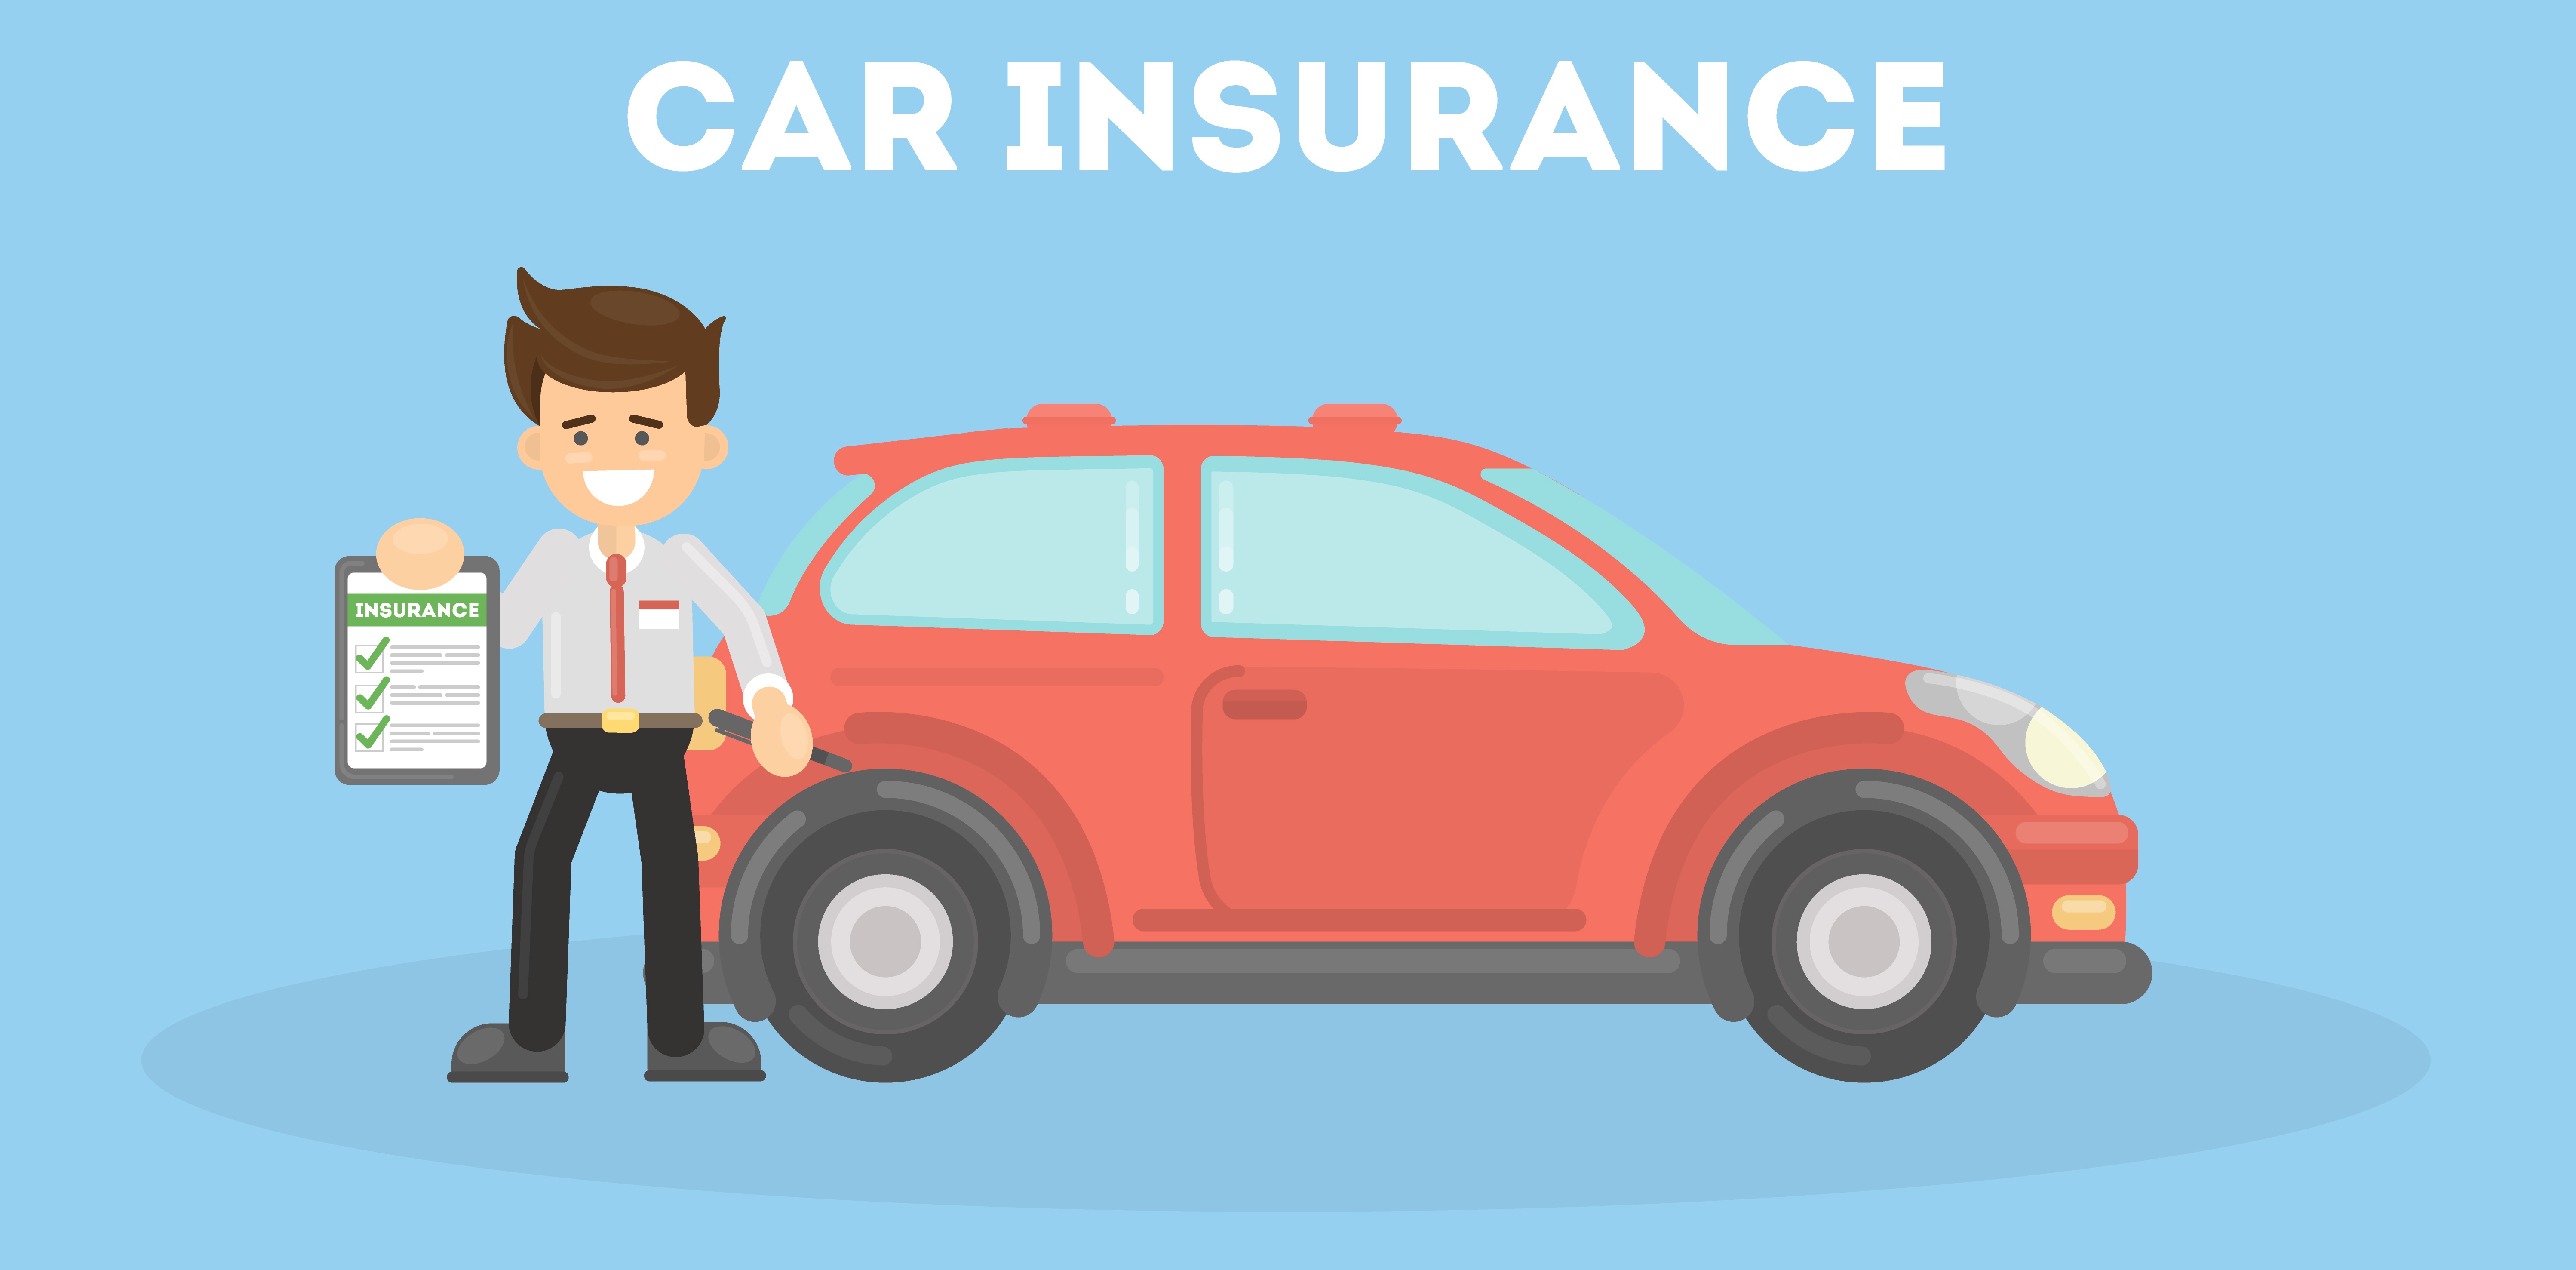 Get The Best Car Insurance For Yourself - Funender.com